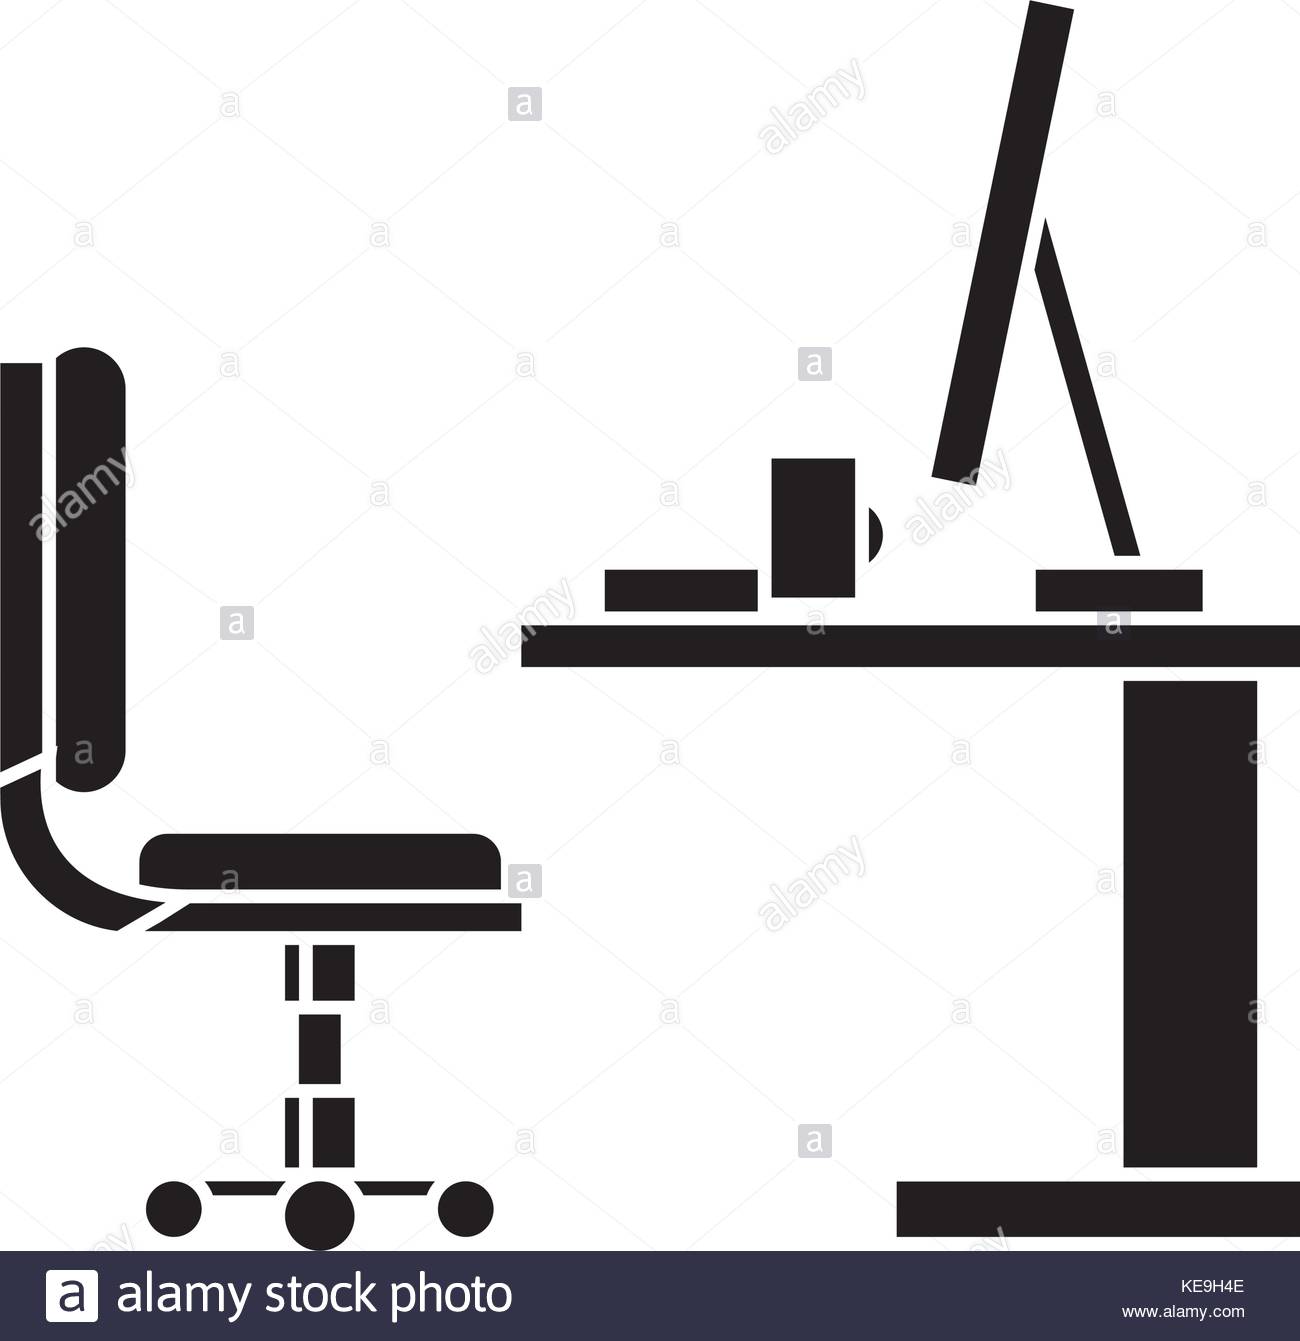 Computer, desk, drawers, home, lamp, office, pc icon | Icon search 